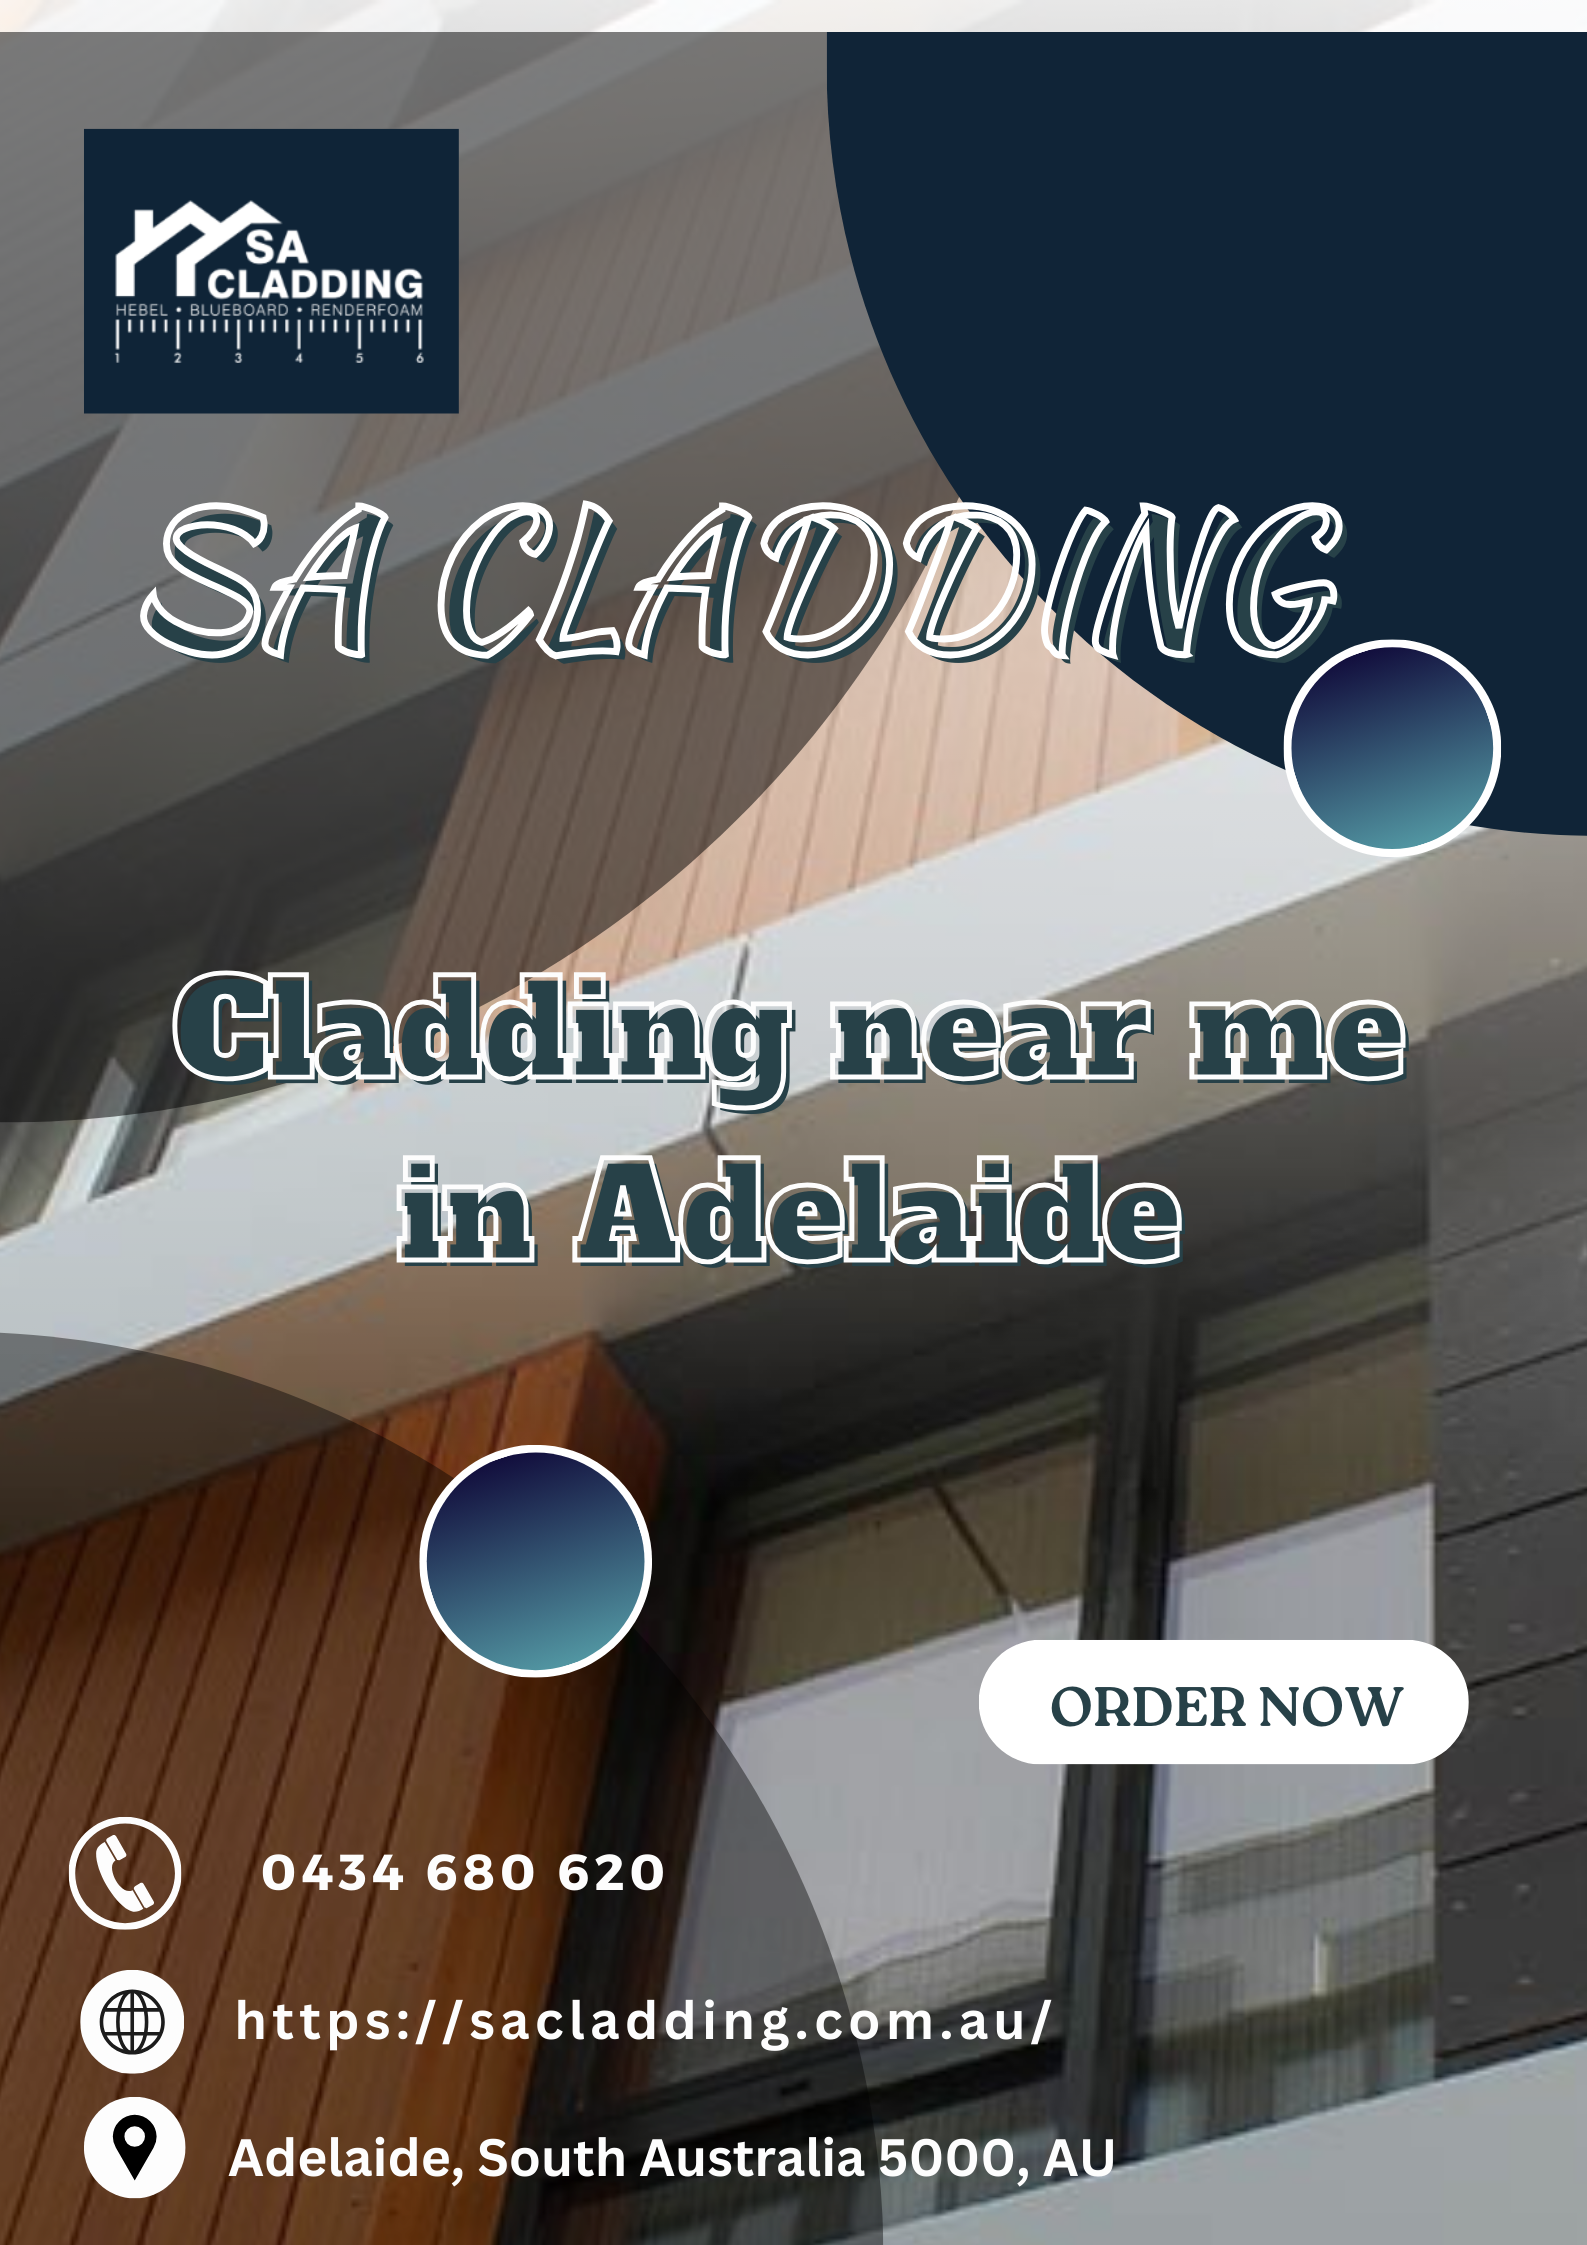 SA Cladding: Professional Cladding Near You in Adelaide to Transform Your Space : ext_6433432 — LiveJournal